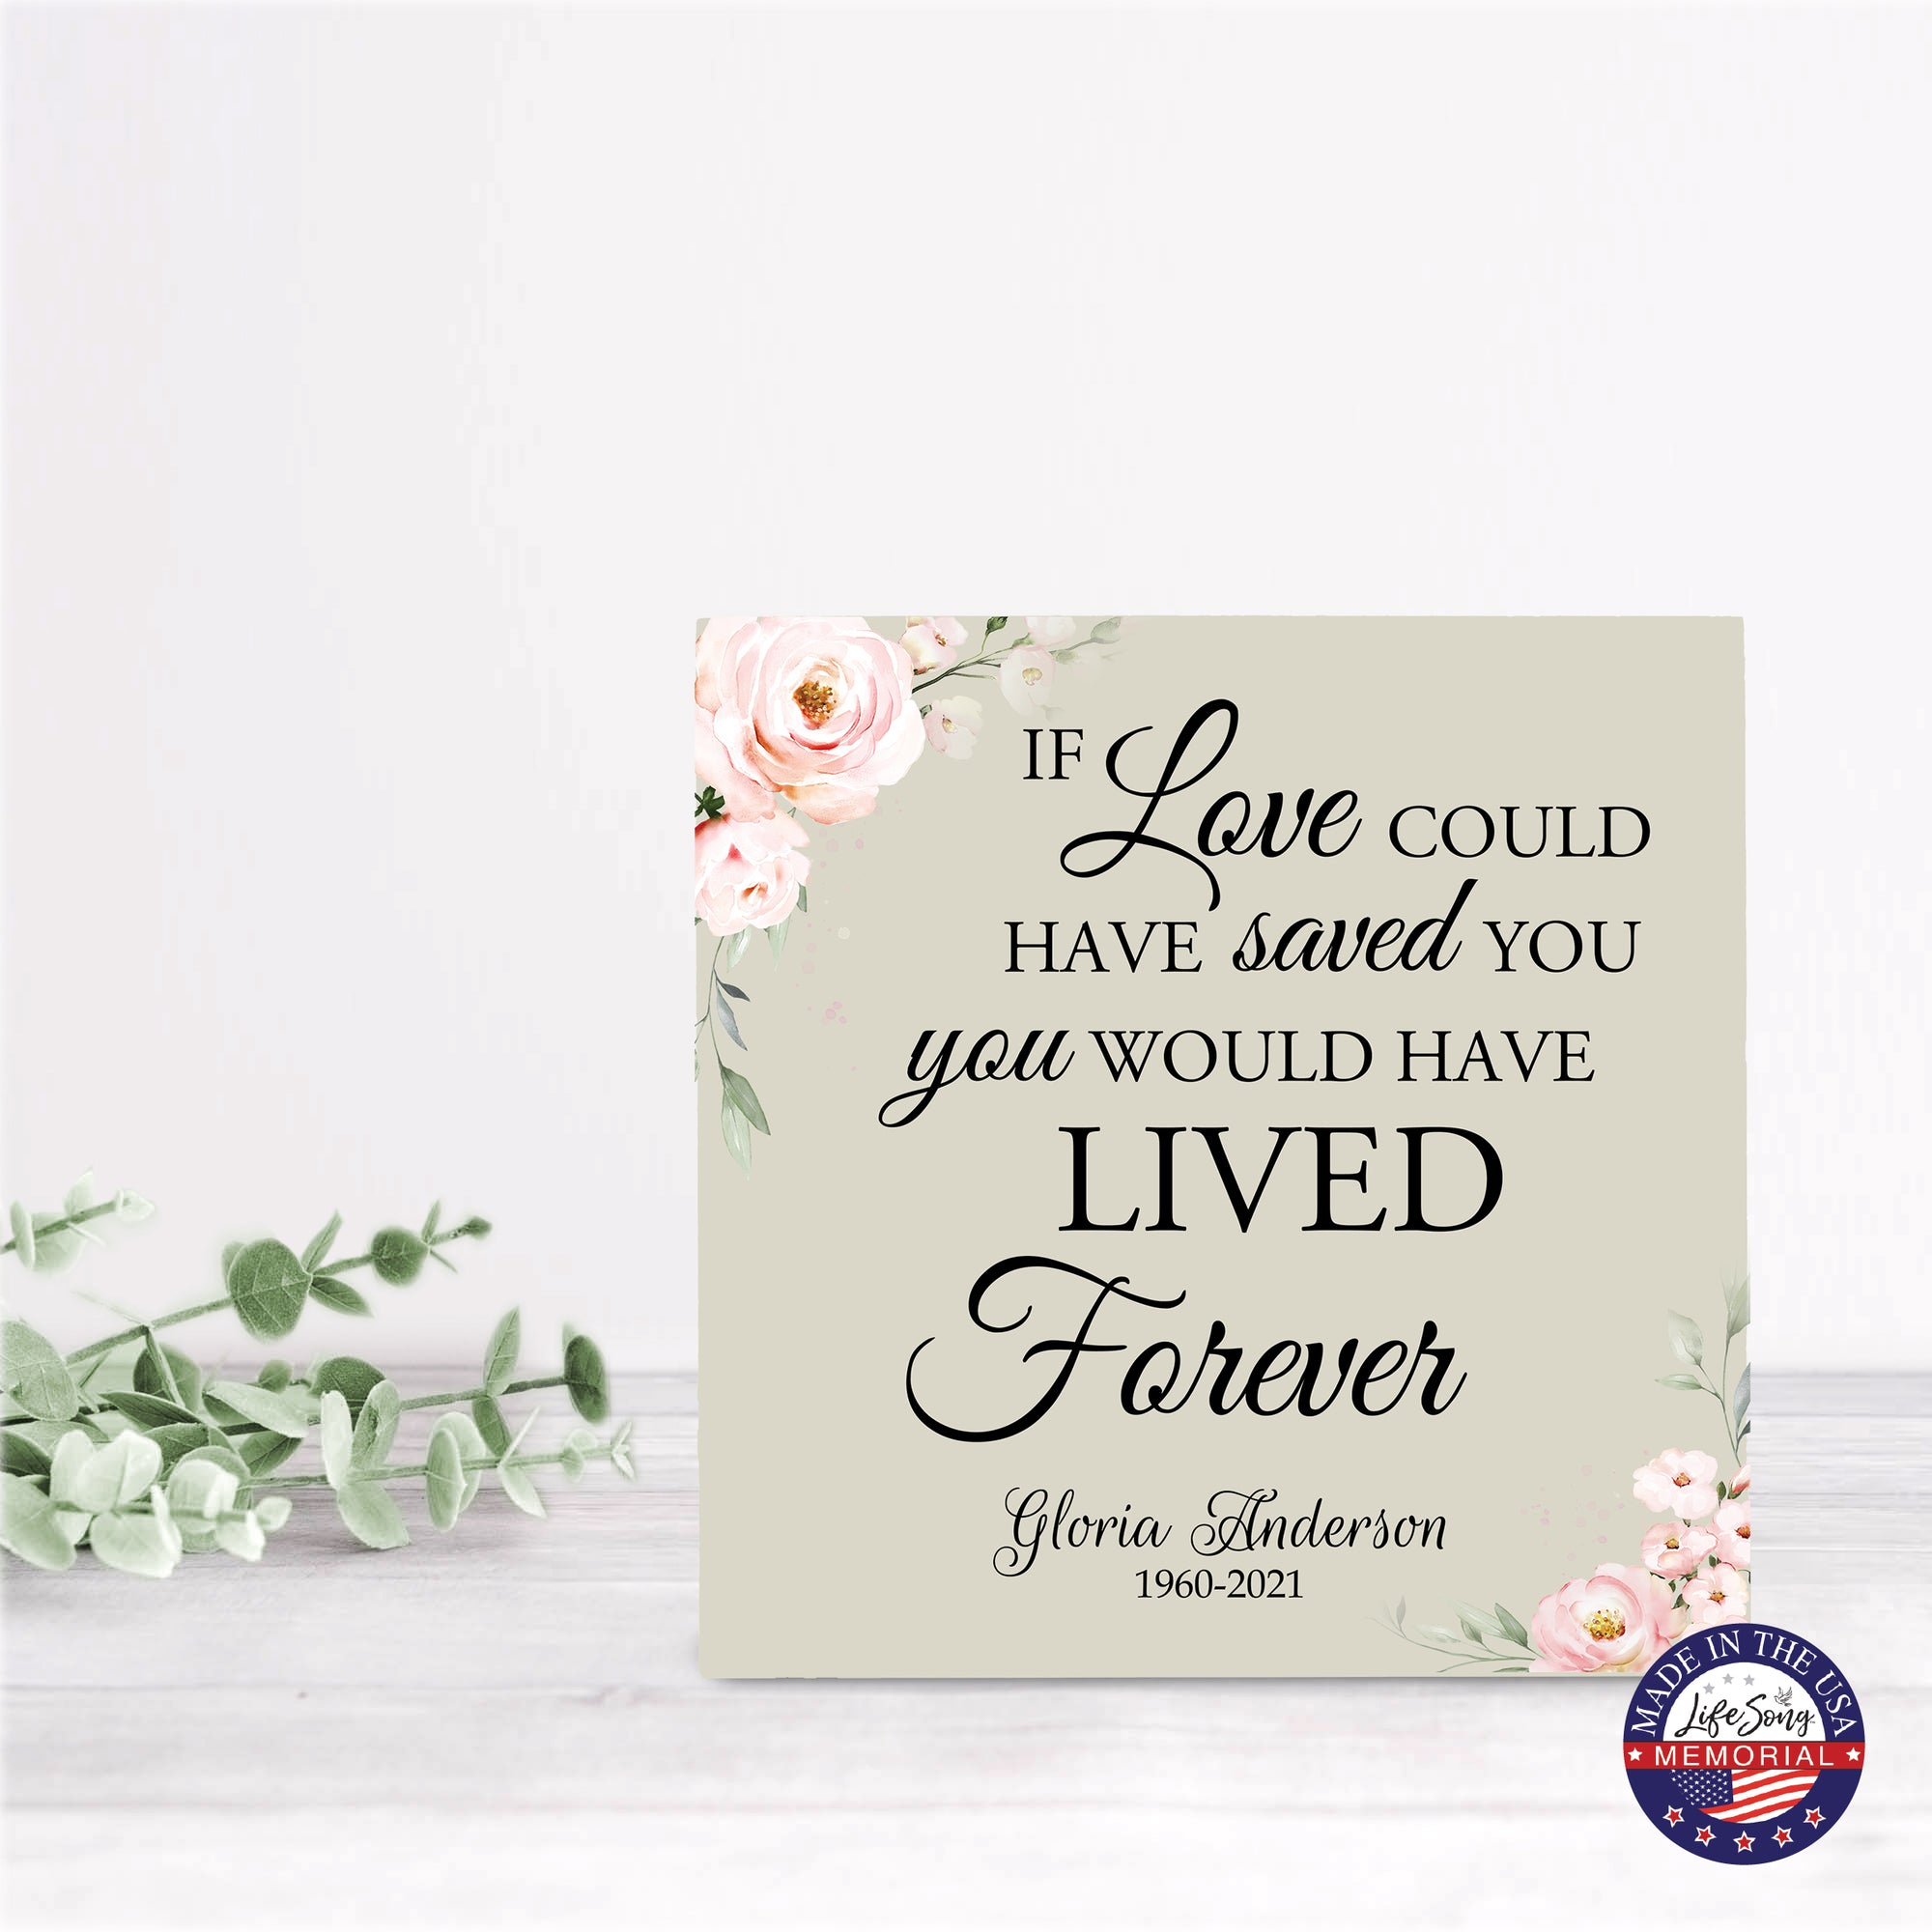 Timeless Human Memorial Shadow Box Urn With Inspirational Verse in Ivory - If Love Could Have Saved You